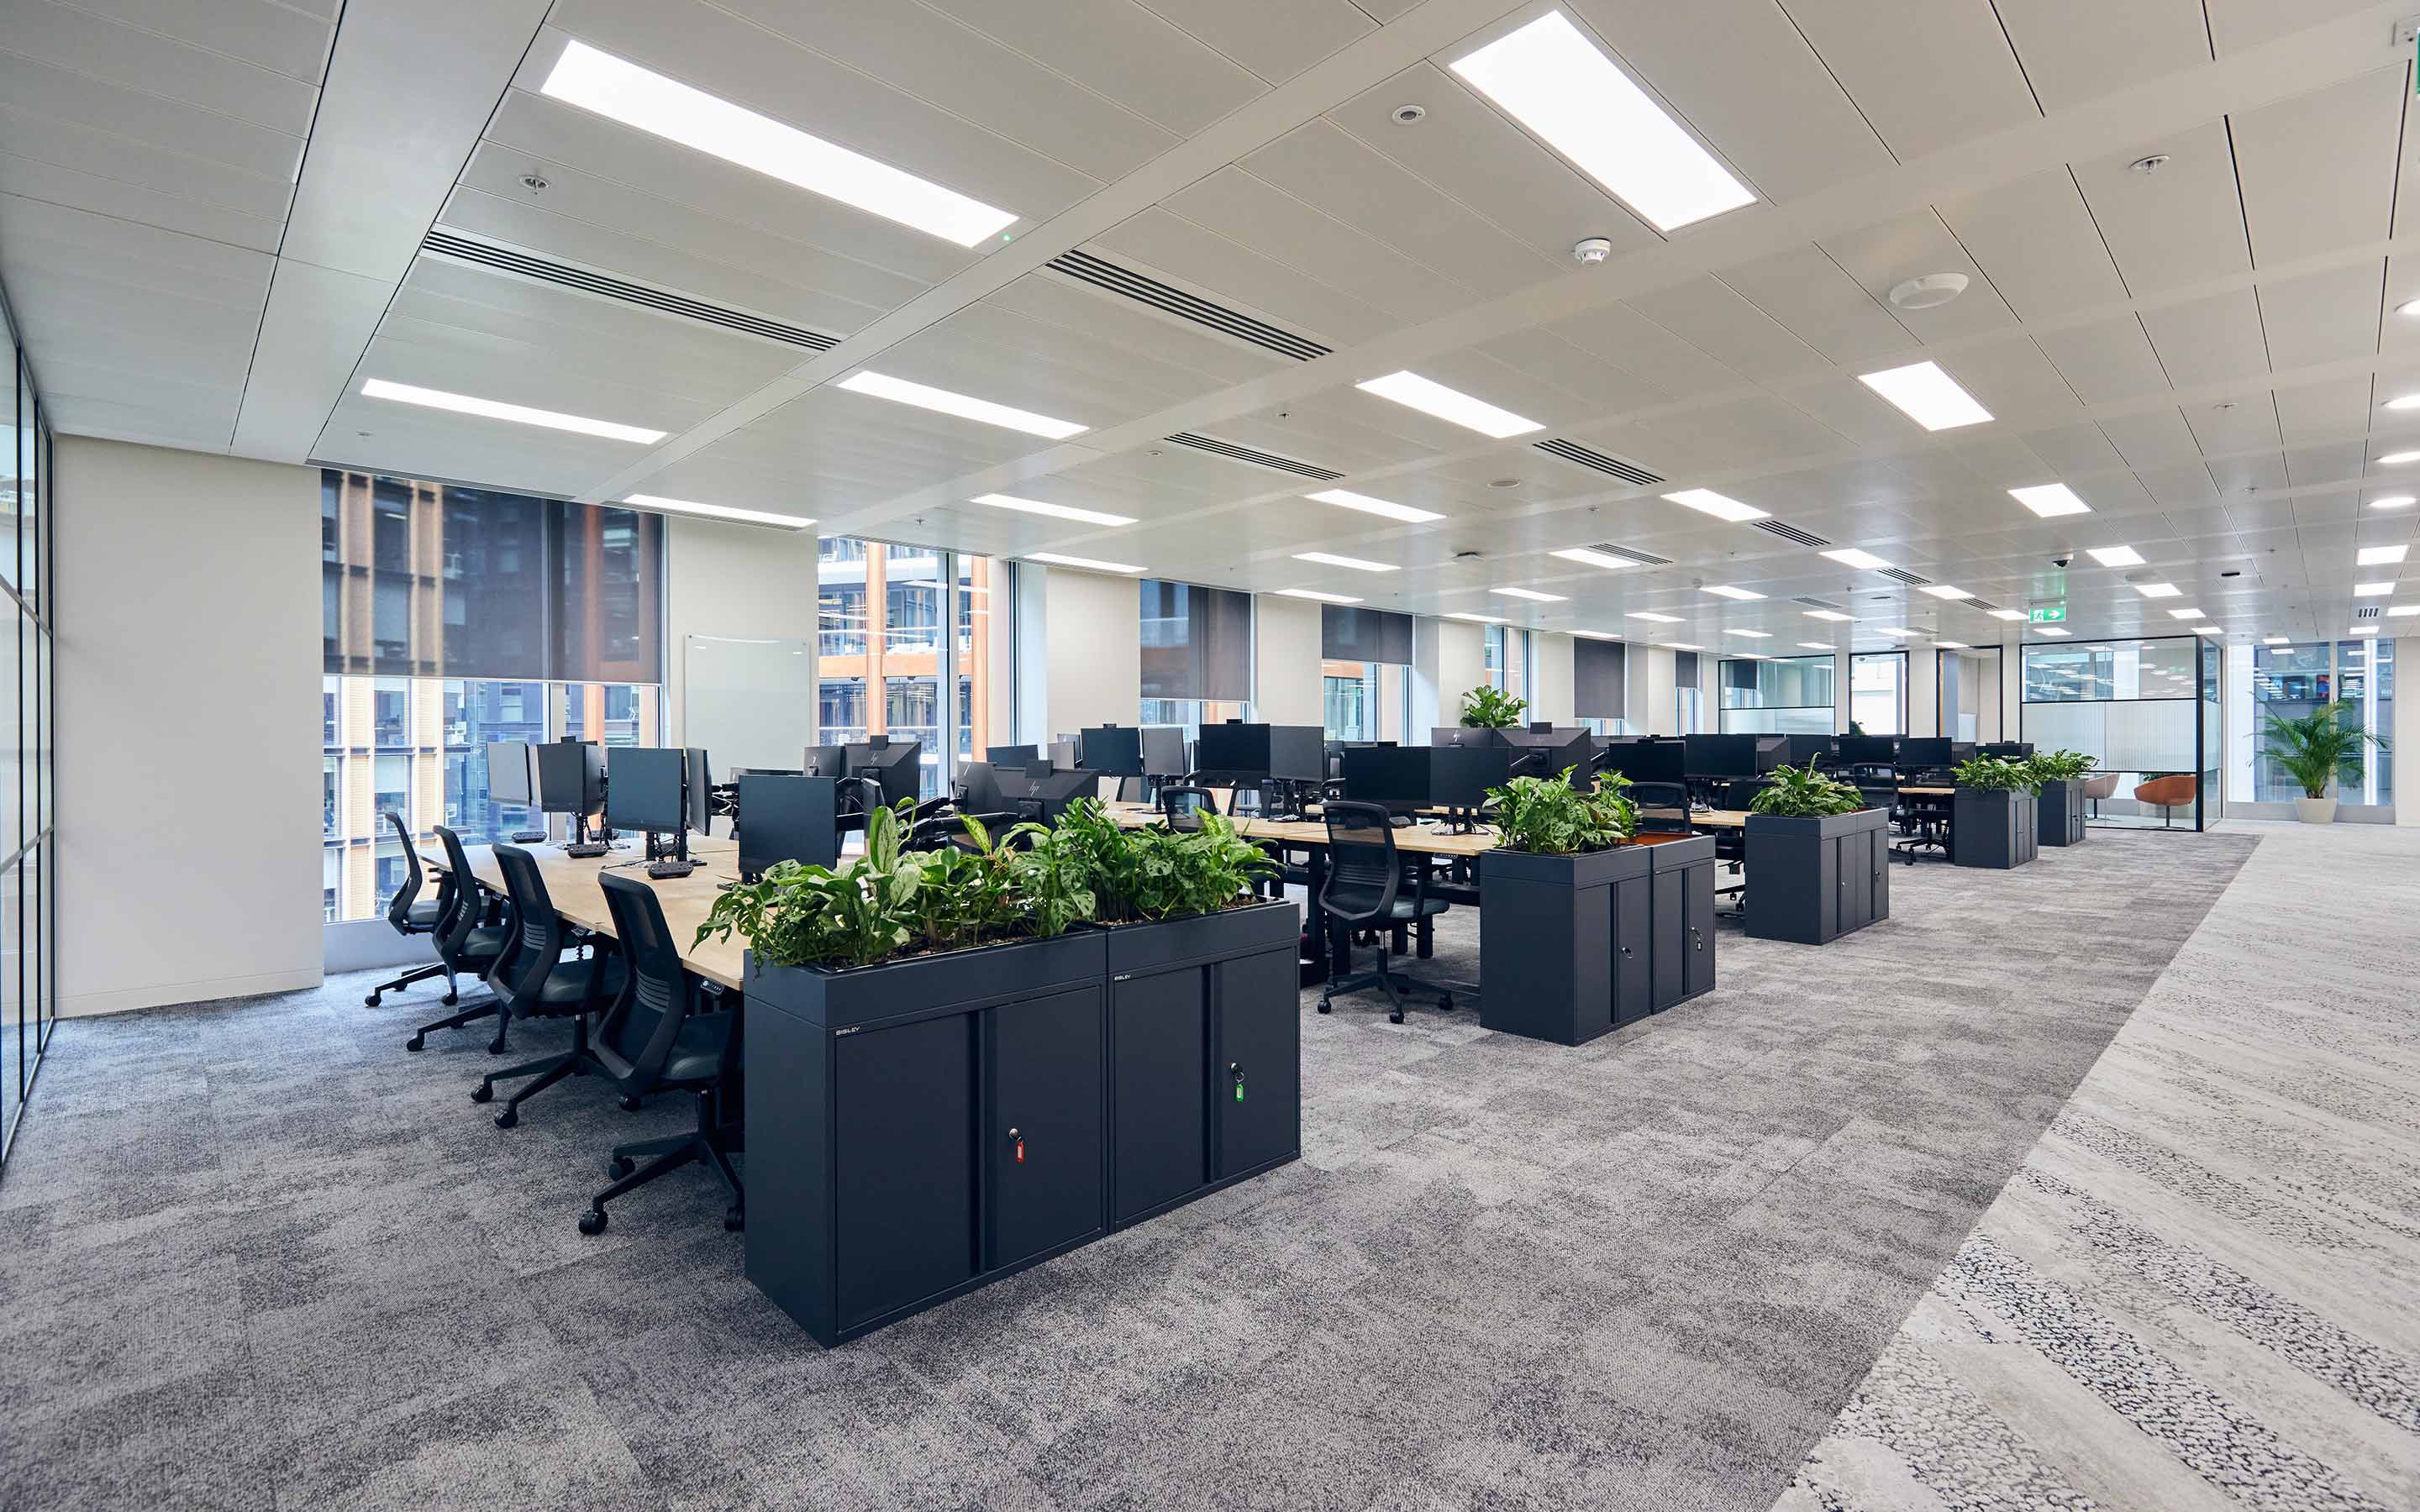 The image is an expansive open-plan desking area with planting and a grey mottled carpet